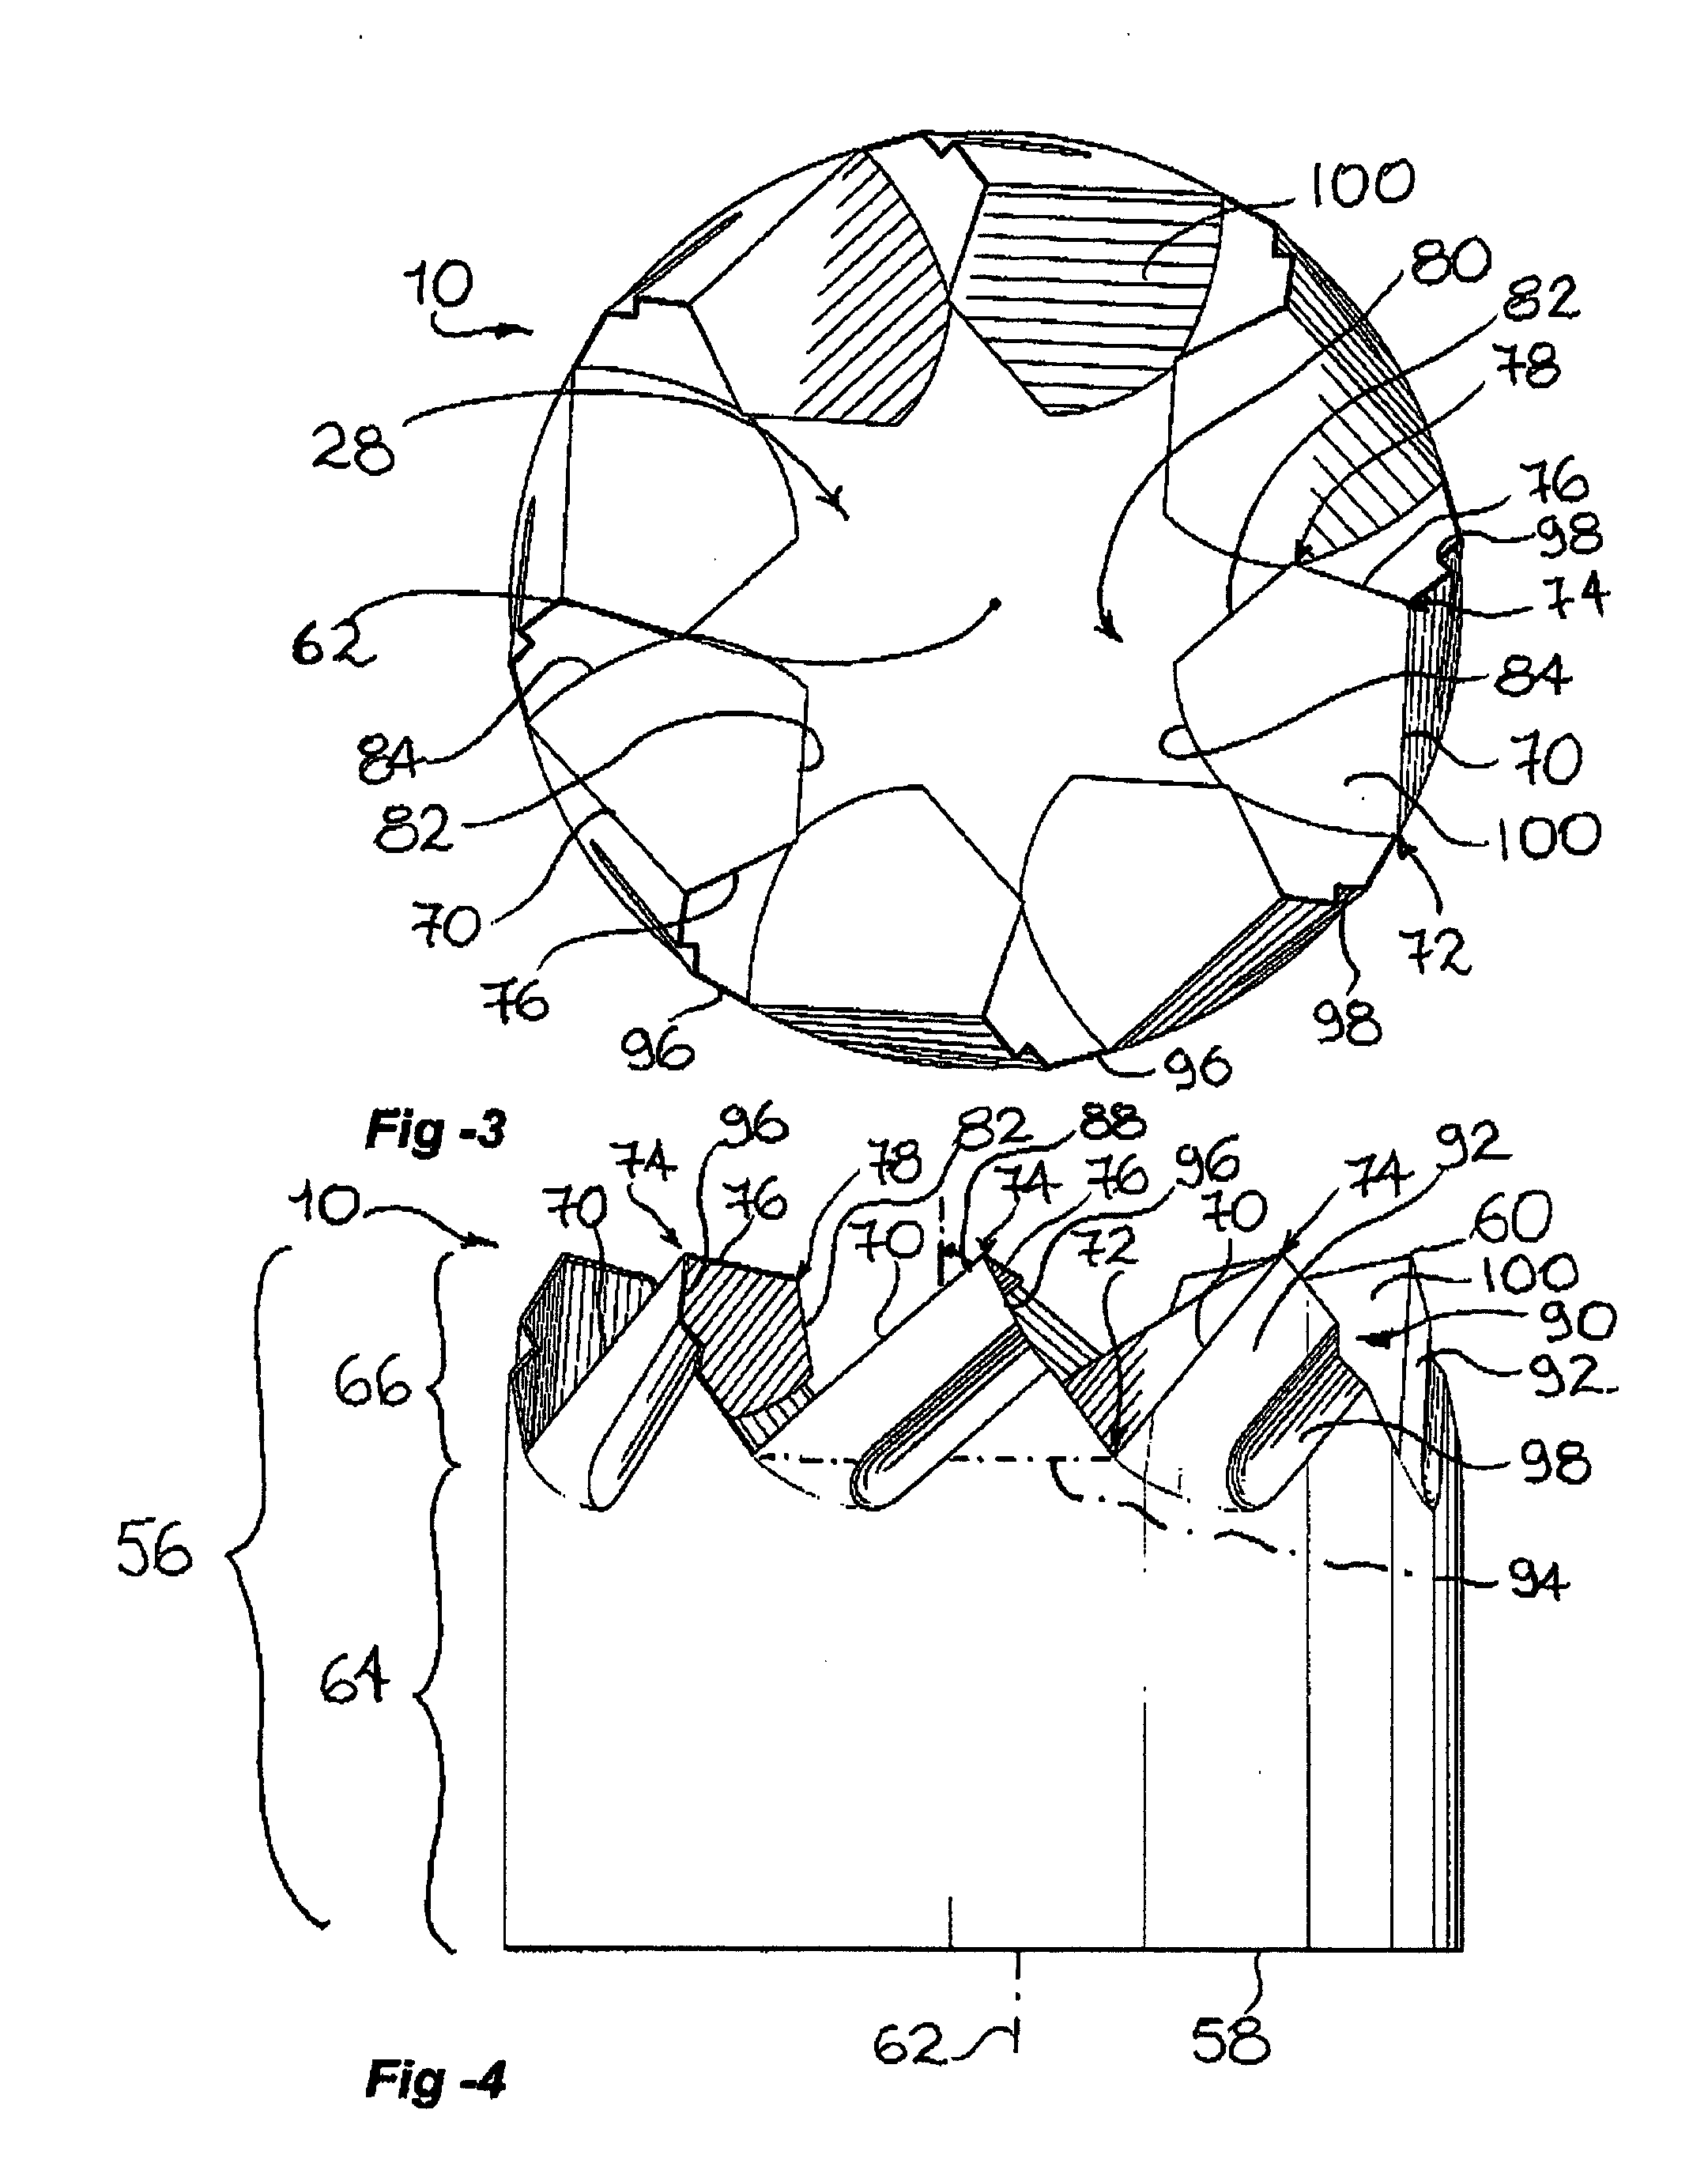 Flow guiding structure for an internal combustion engine